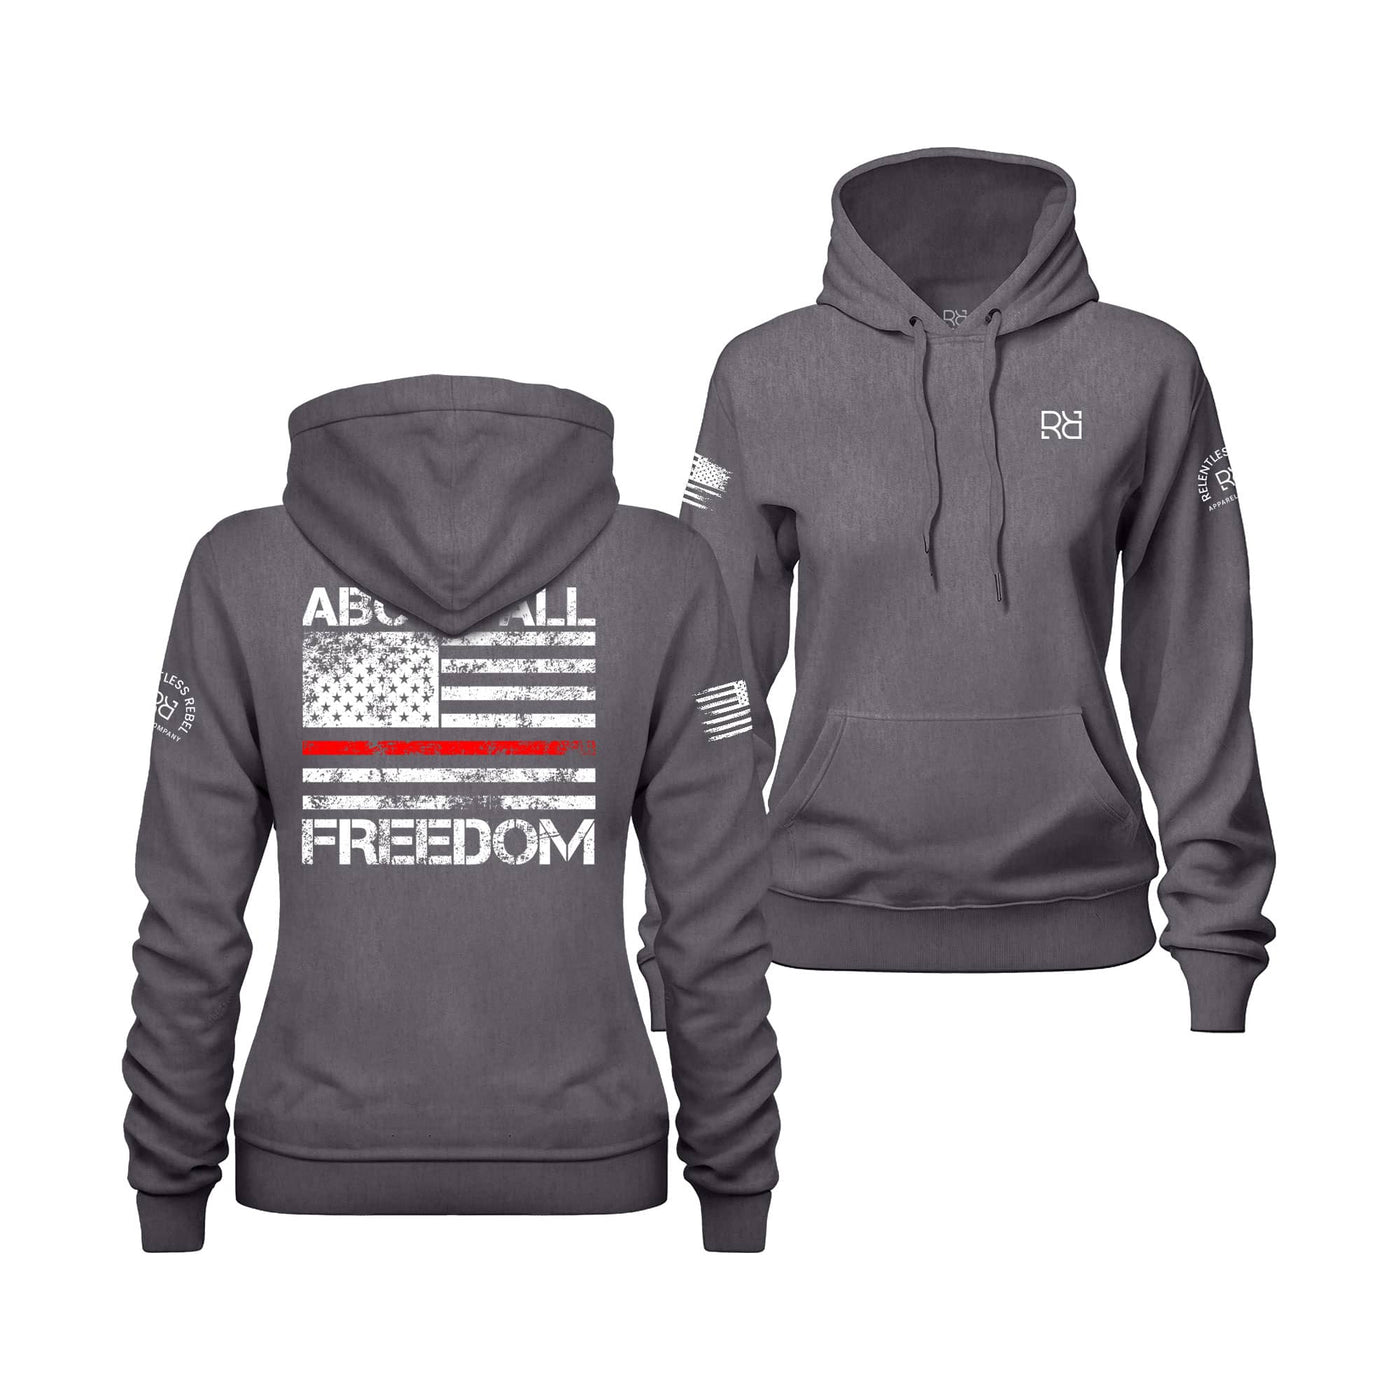 Charcoal Heather Women's Above All Freedom Back Design Hoodie